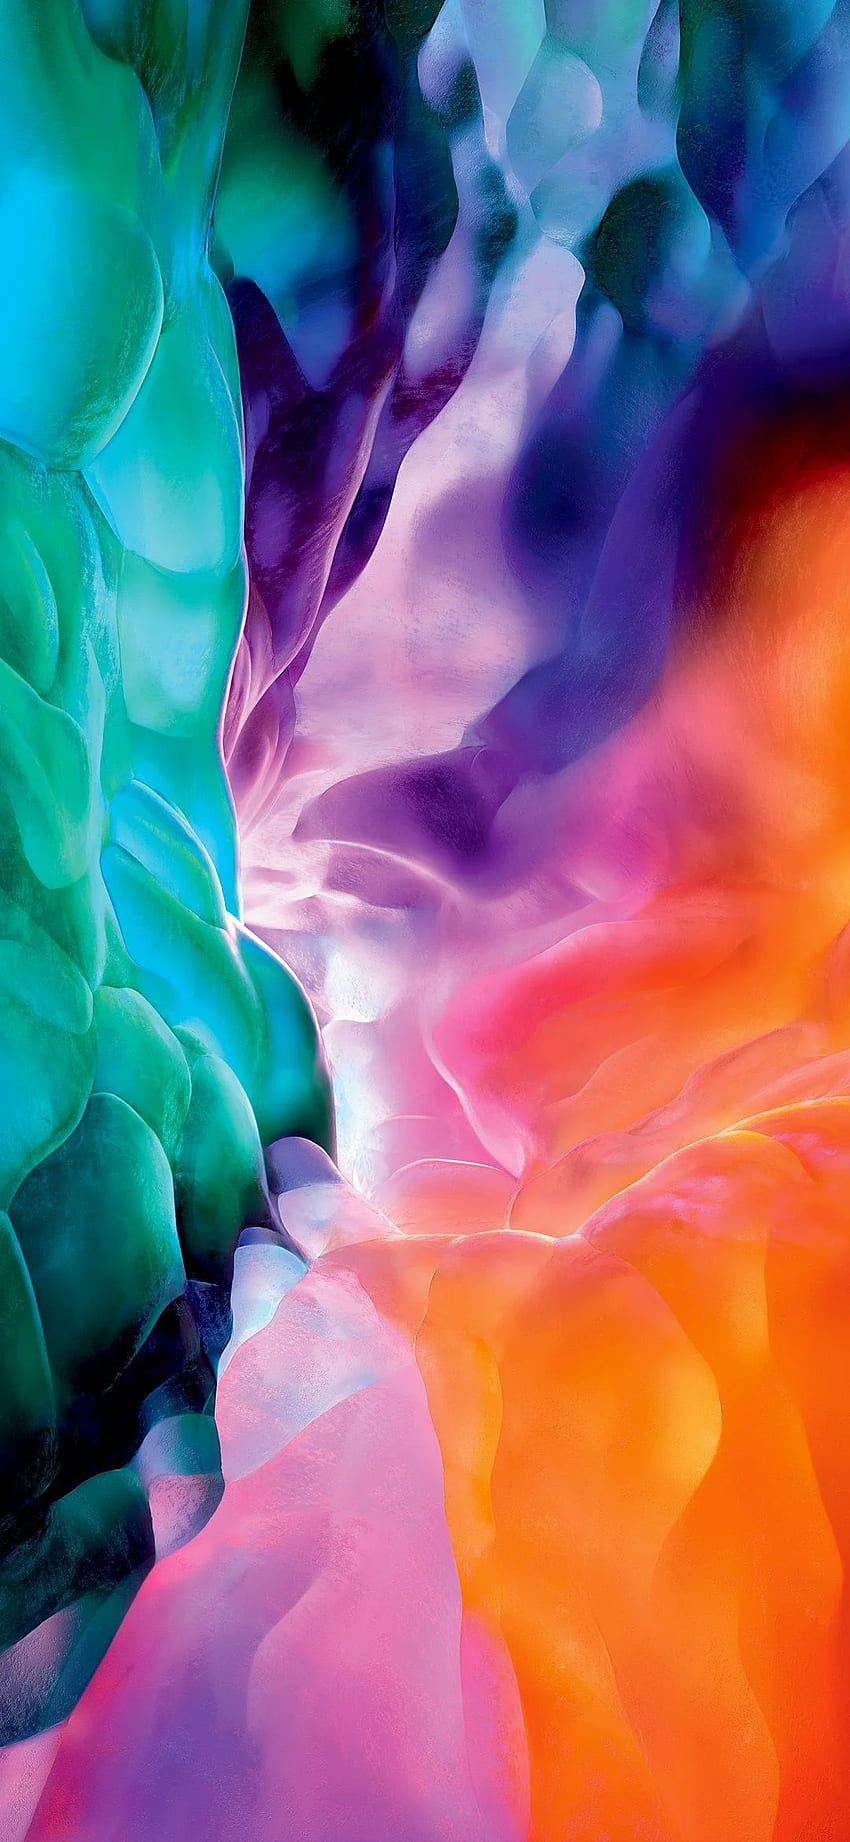 Download the Samsung Galaxy Note 20 wallpapers